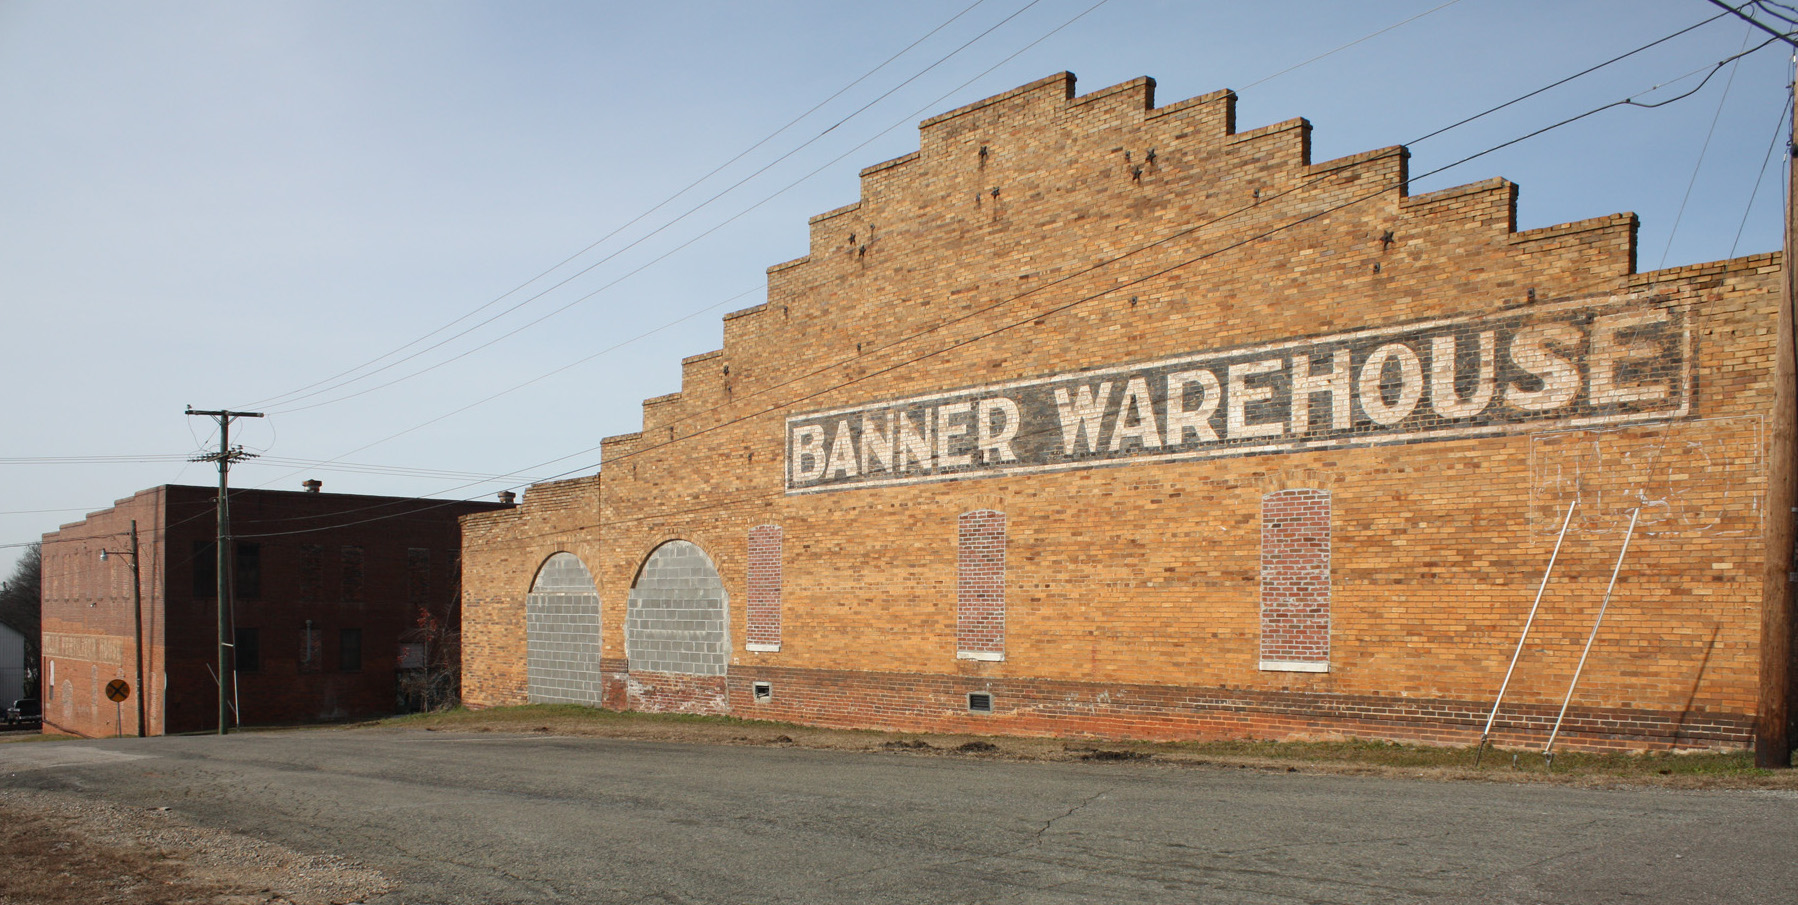 186-5005_Chase_City_WarehouseCommercial_District_2019_Banner_Warehouse_VLR_Online